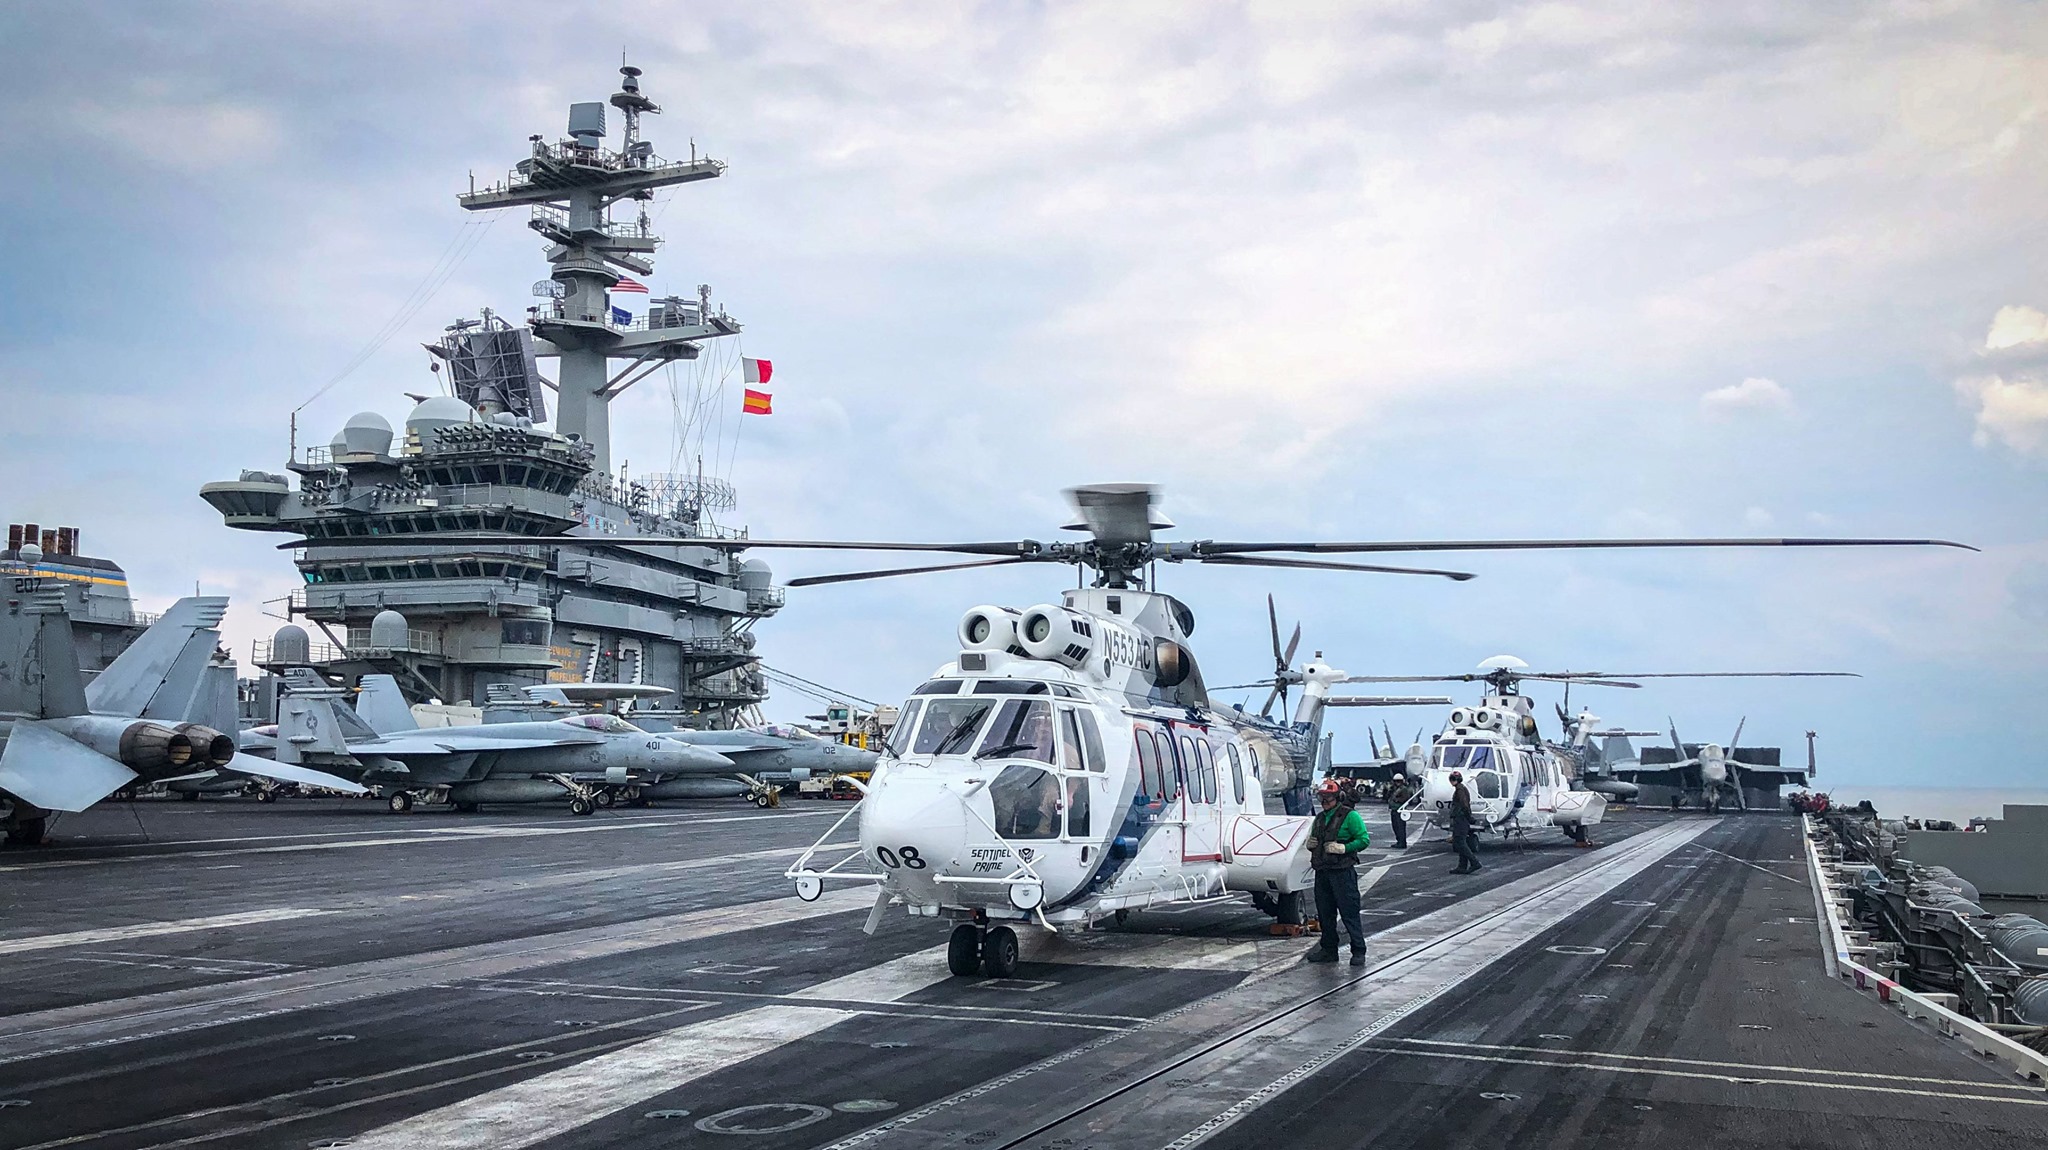 U.S. Navy uses fleet of commercial helicopters